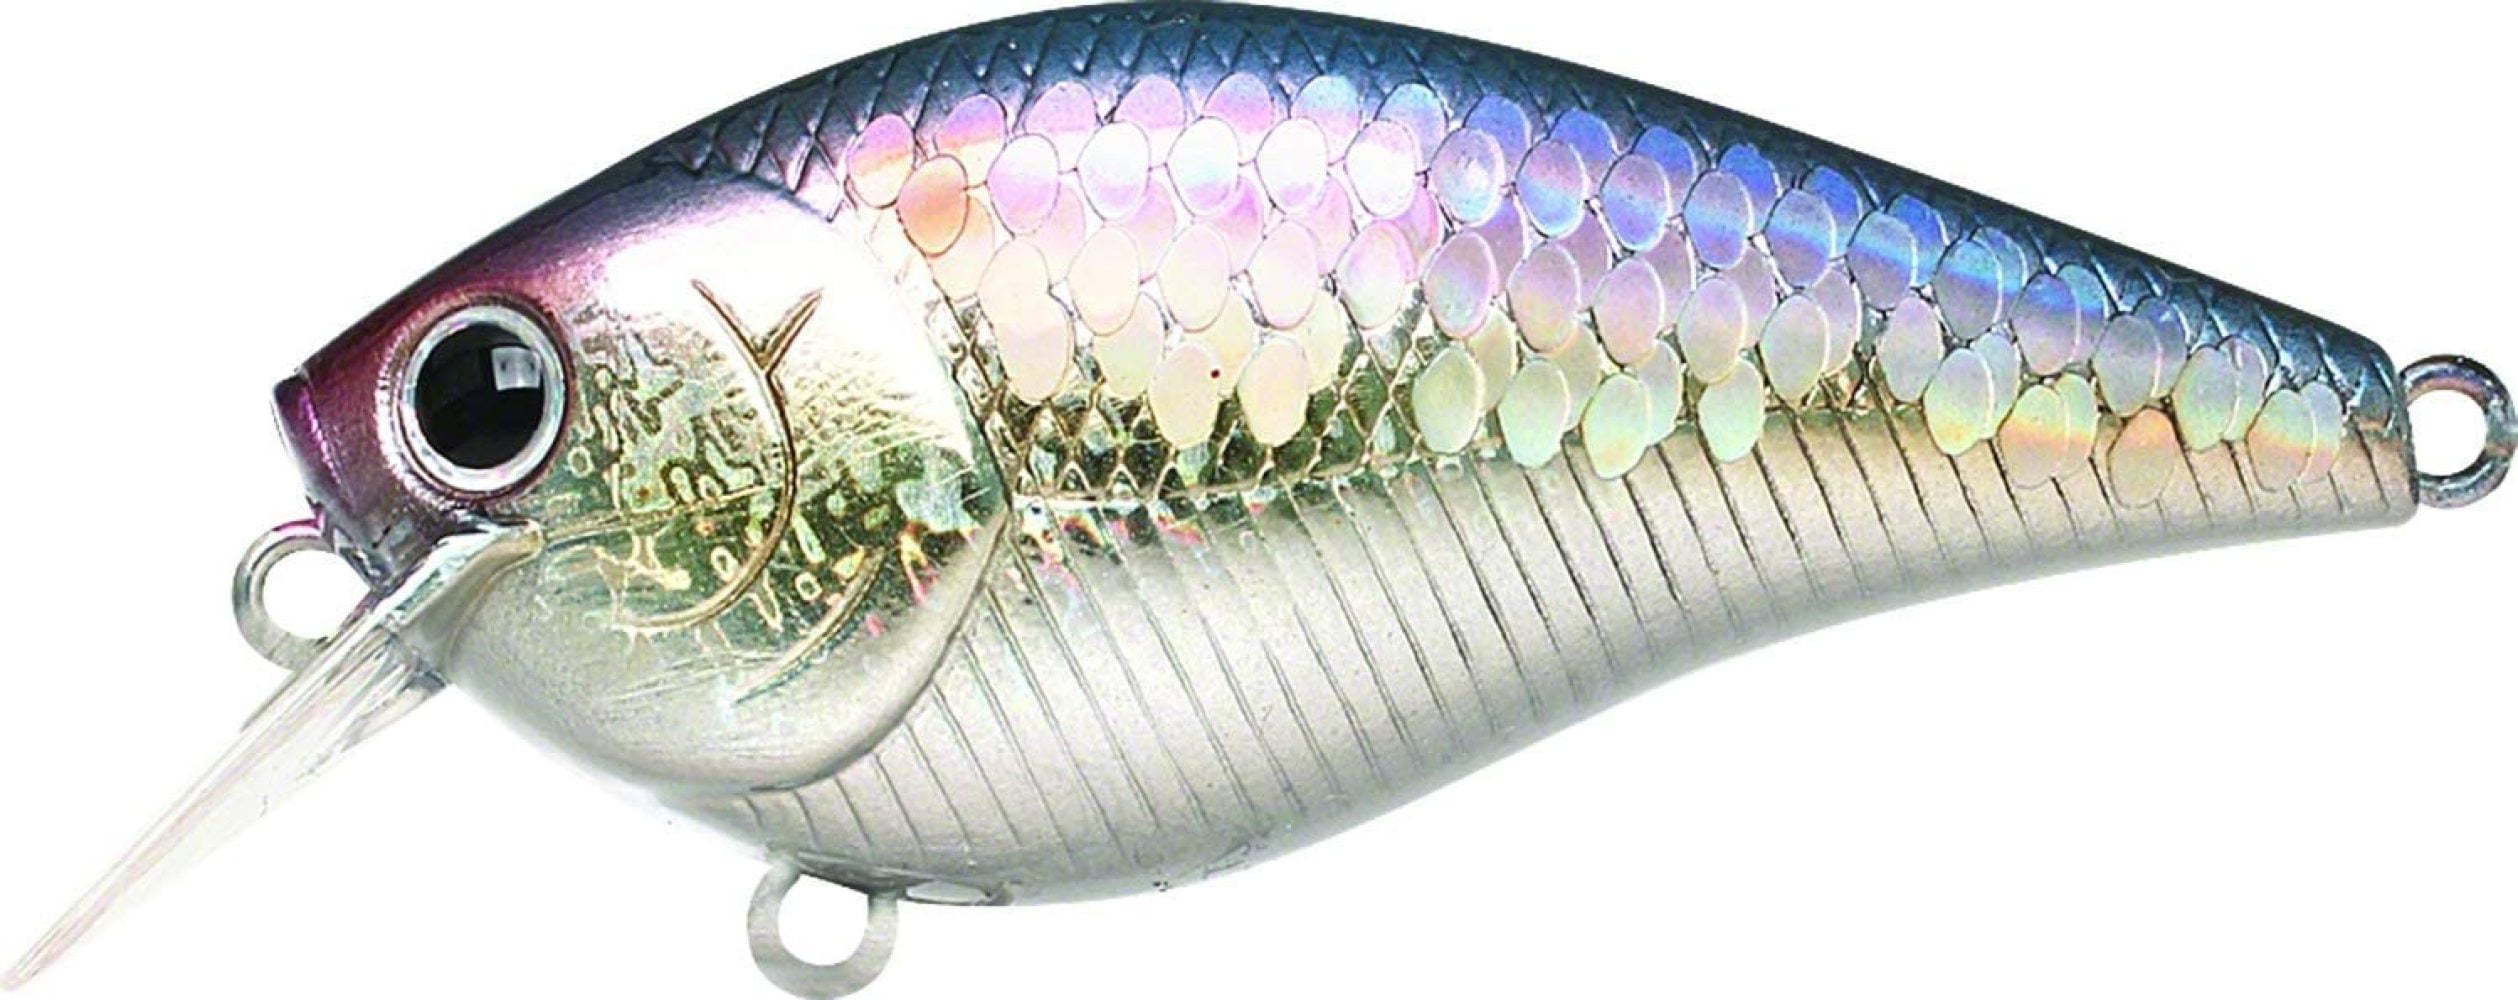 LUCKY CRAFT Area's 1/8-270 MS American Shad 